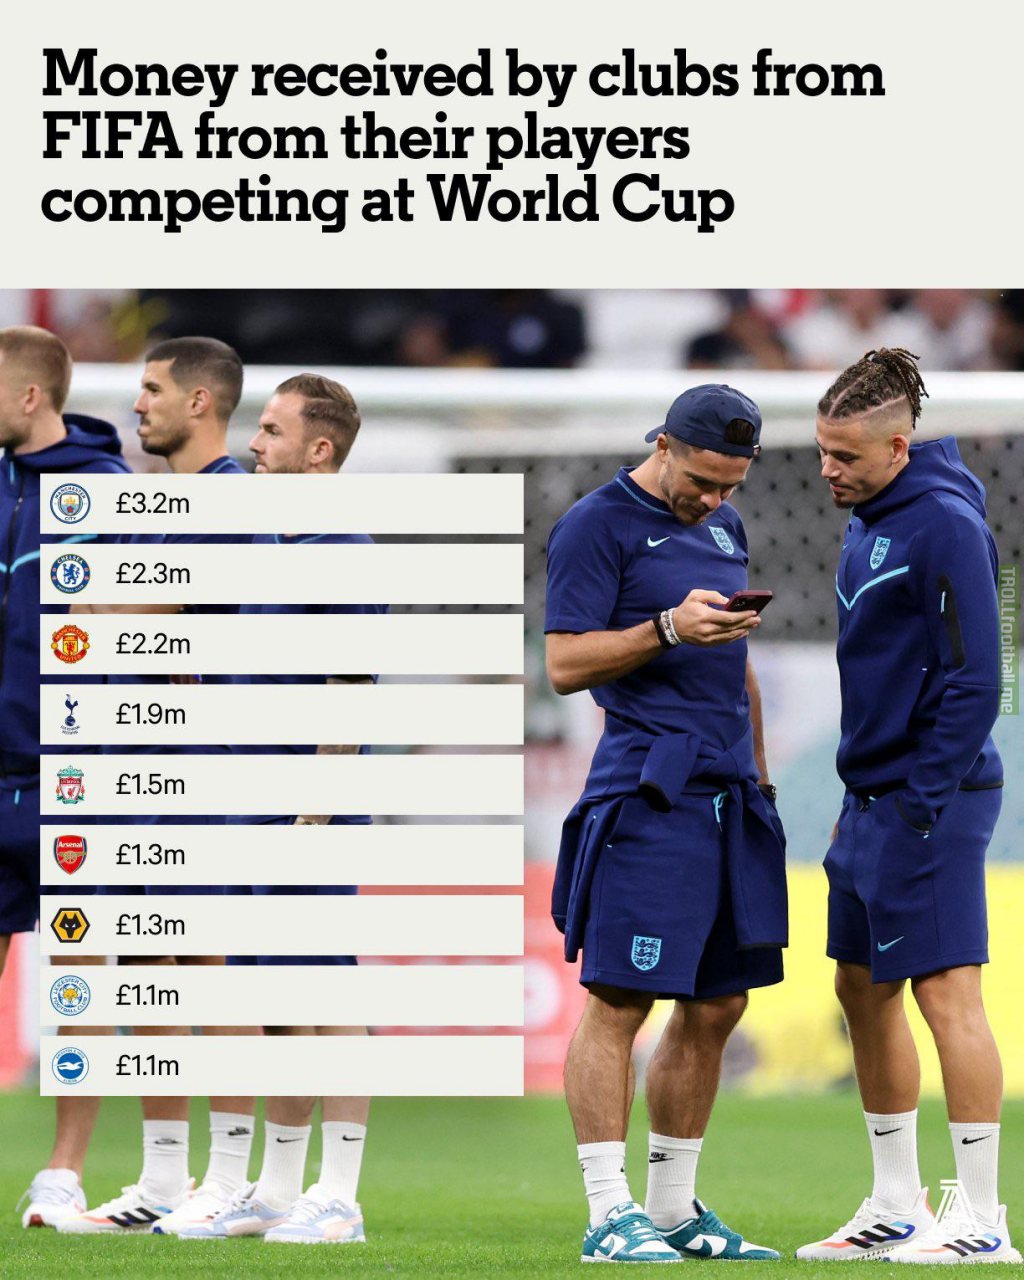 Approximately £8.1k is being paid to Premier League clubs for every day players are competing in the FIFAWorldCup. The calculation for each player is split three ways, ensuring former clubs are not left empty-handed. We calculated which Premier League clubs will be getting the most.